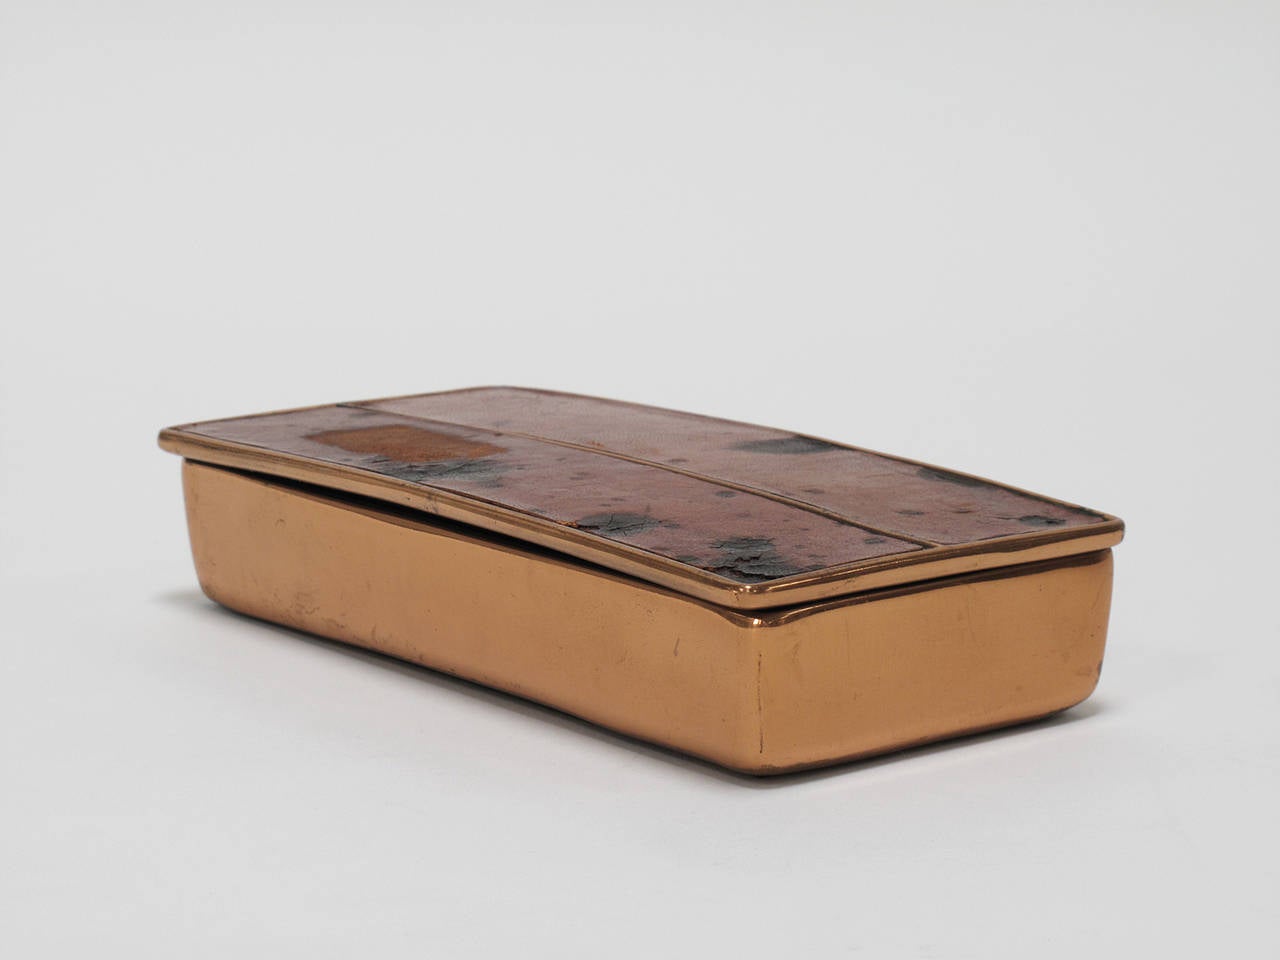 Inlay Modernist Copper and Leather Box by Ben Seibel